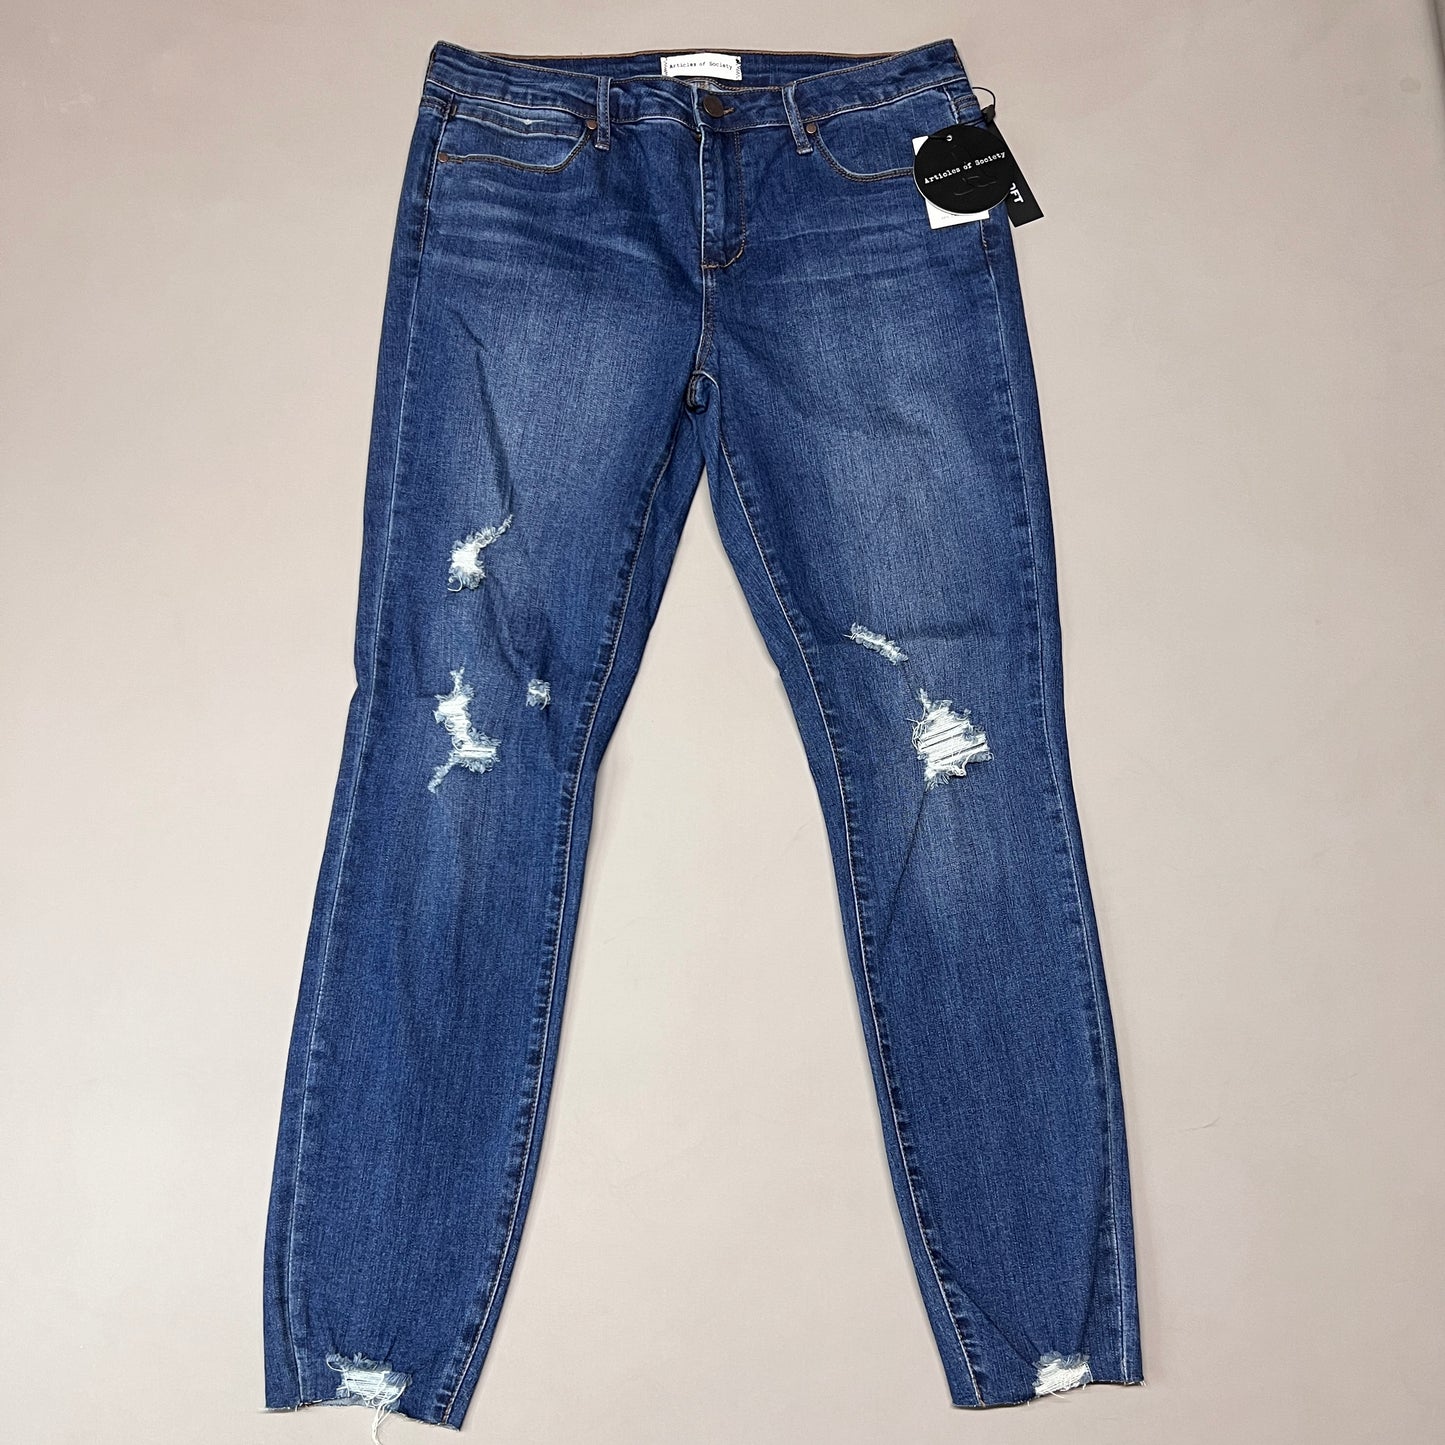 ARTICLES OF SOCIETY Hilo Ripped Denim Jeans Women's Sz 31 Blue 5350PLV-706 (New)